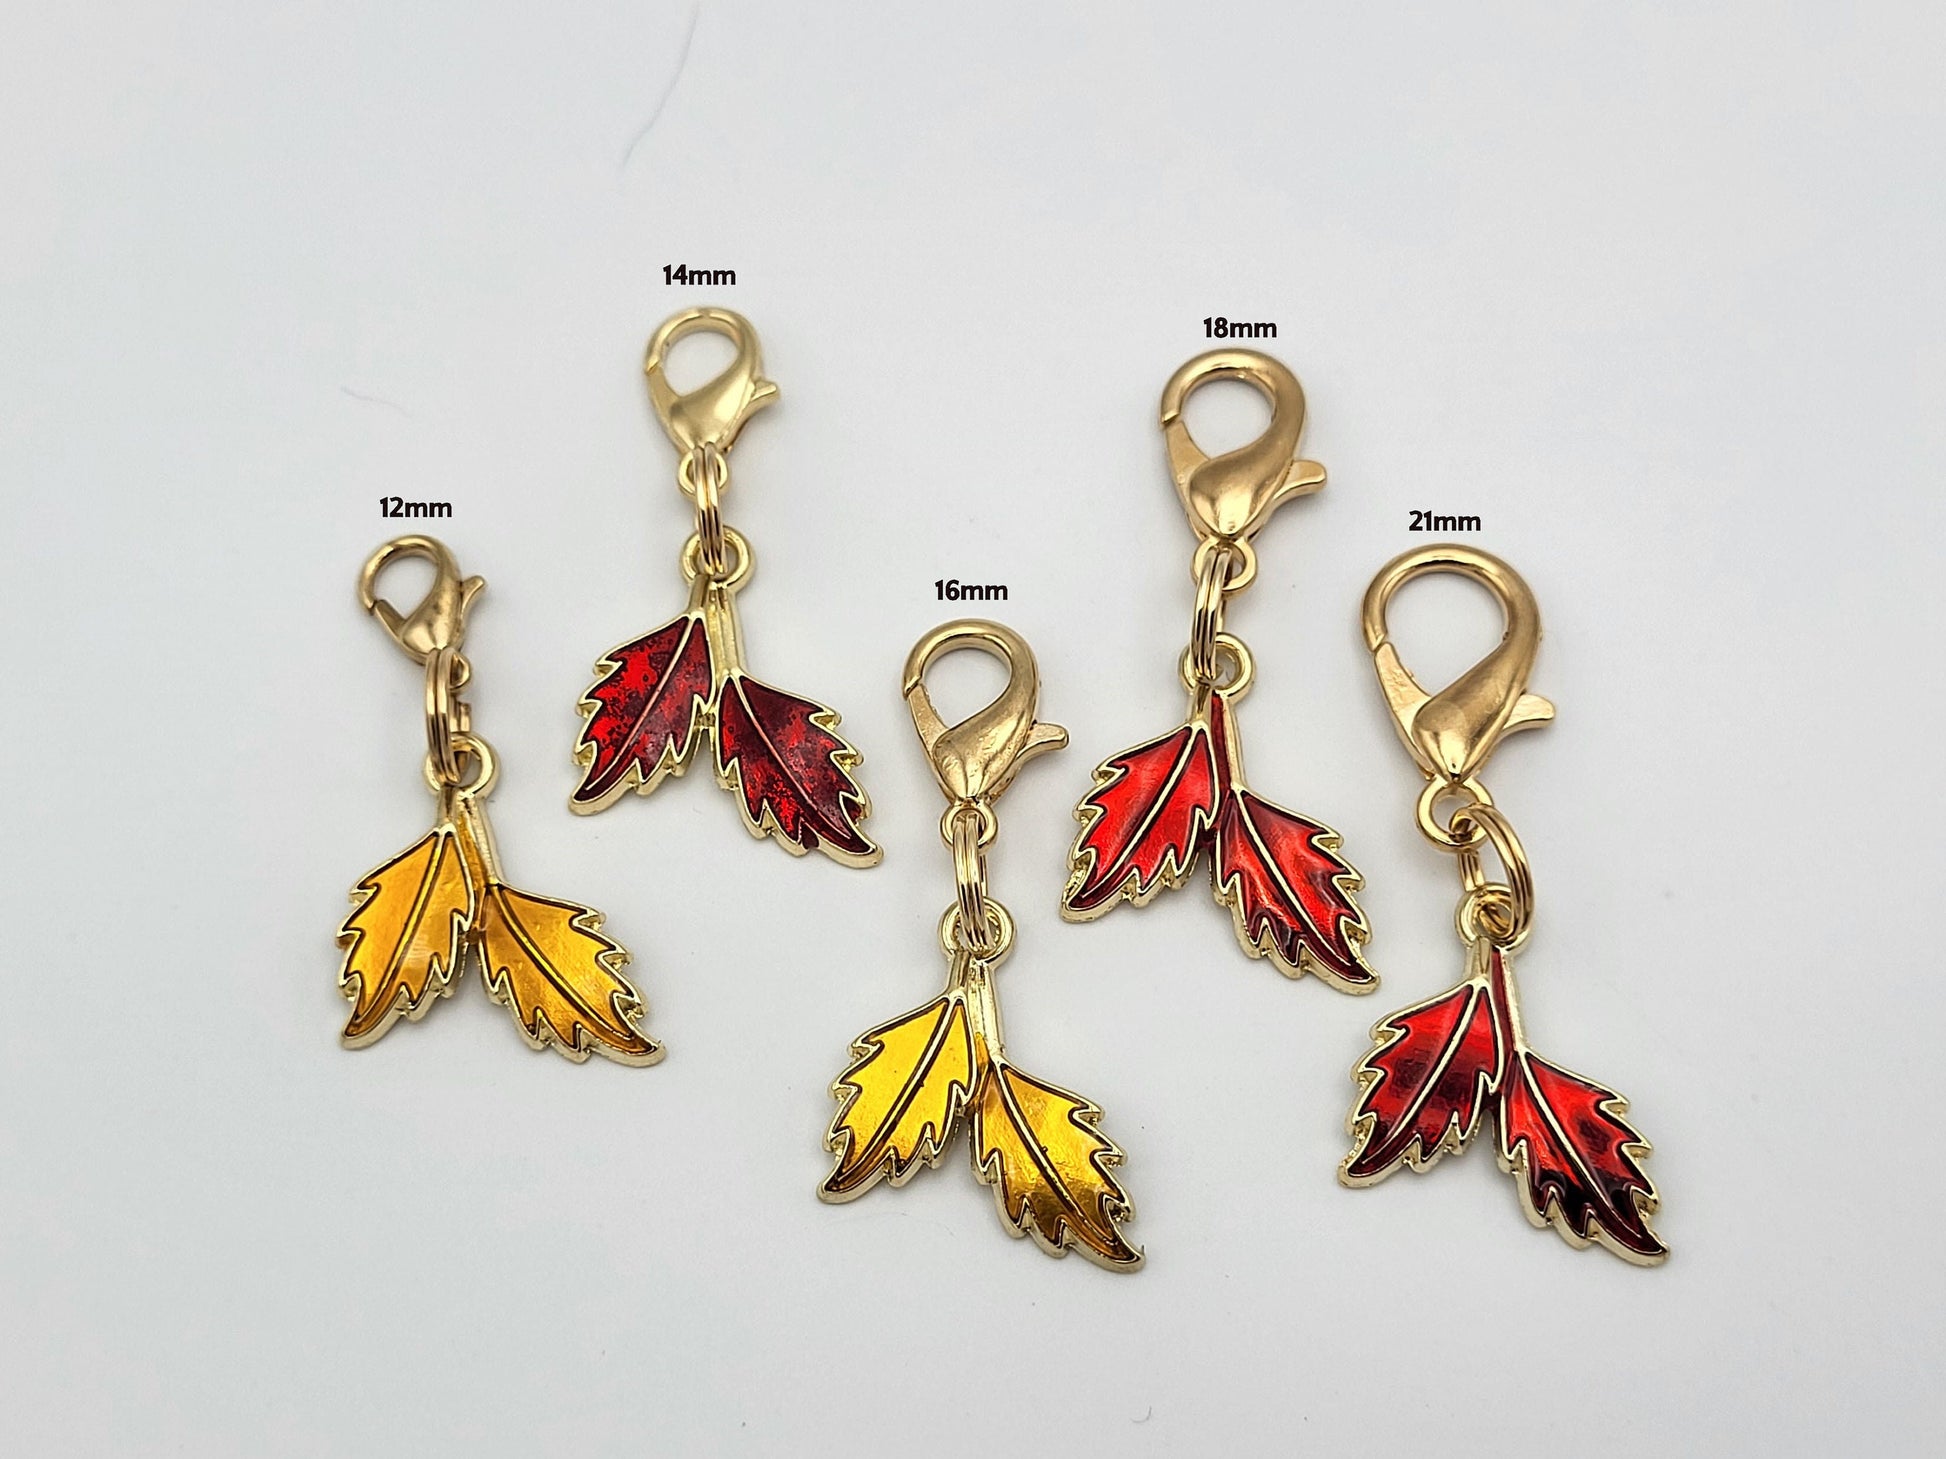 Double Fall Leaves Stitch Markers for Knitting, 4pc jewel | Crochet stitch marker, progress keeper, project bag charms, crochet accessories